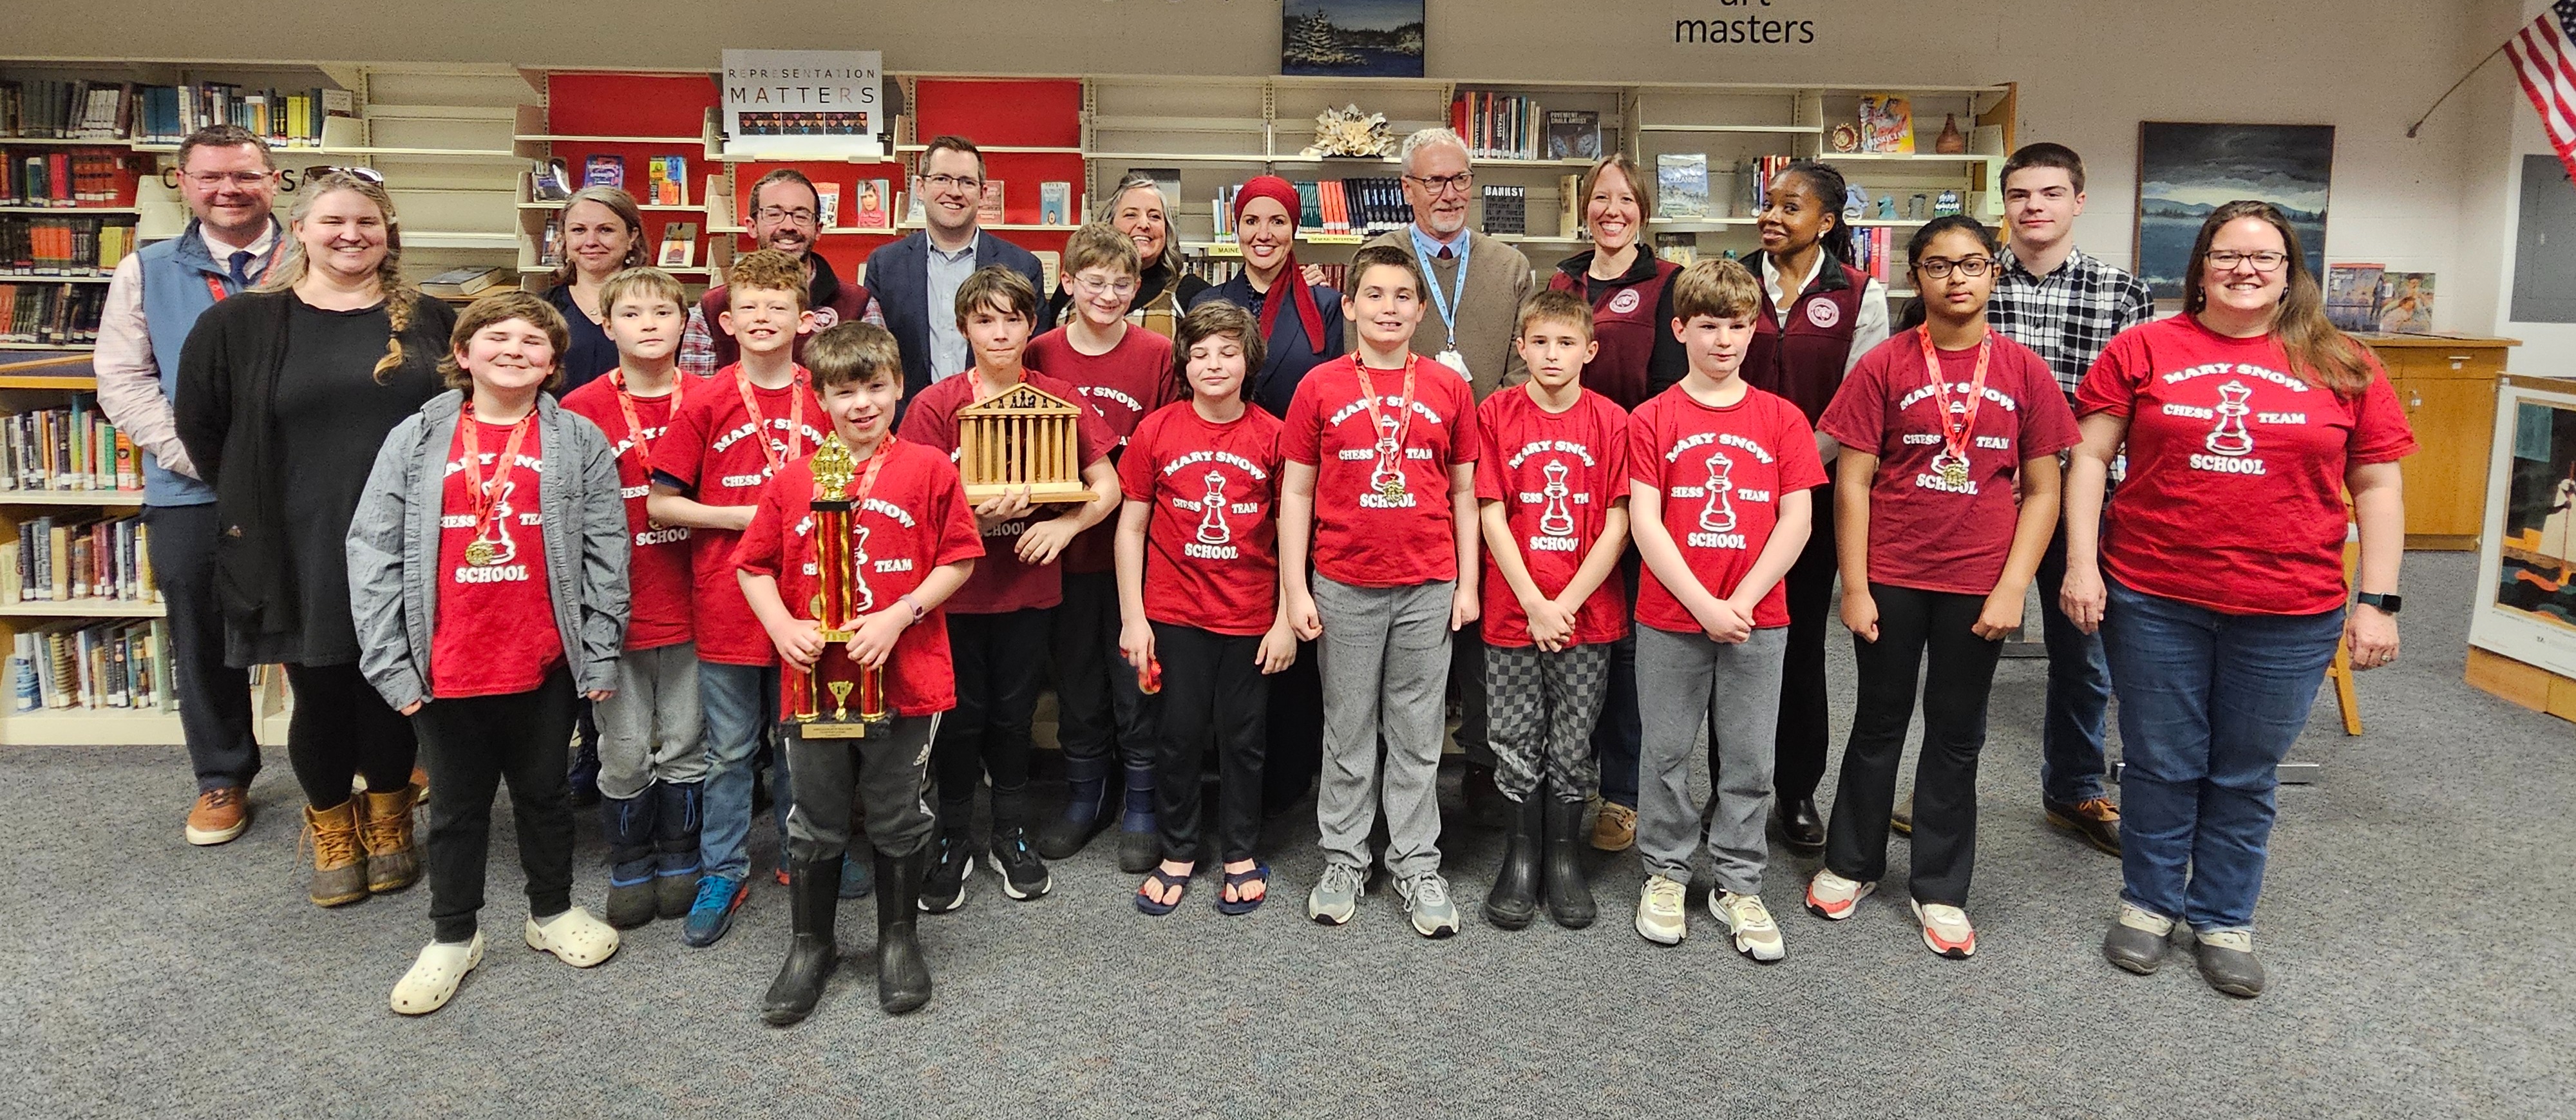 Mary Snow Chess Team Emerges Victorious in Maine Team Chess Championship's K-5 Section